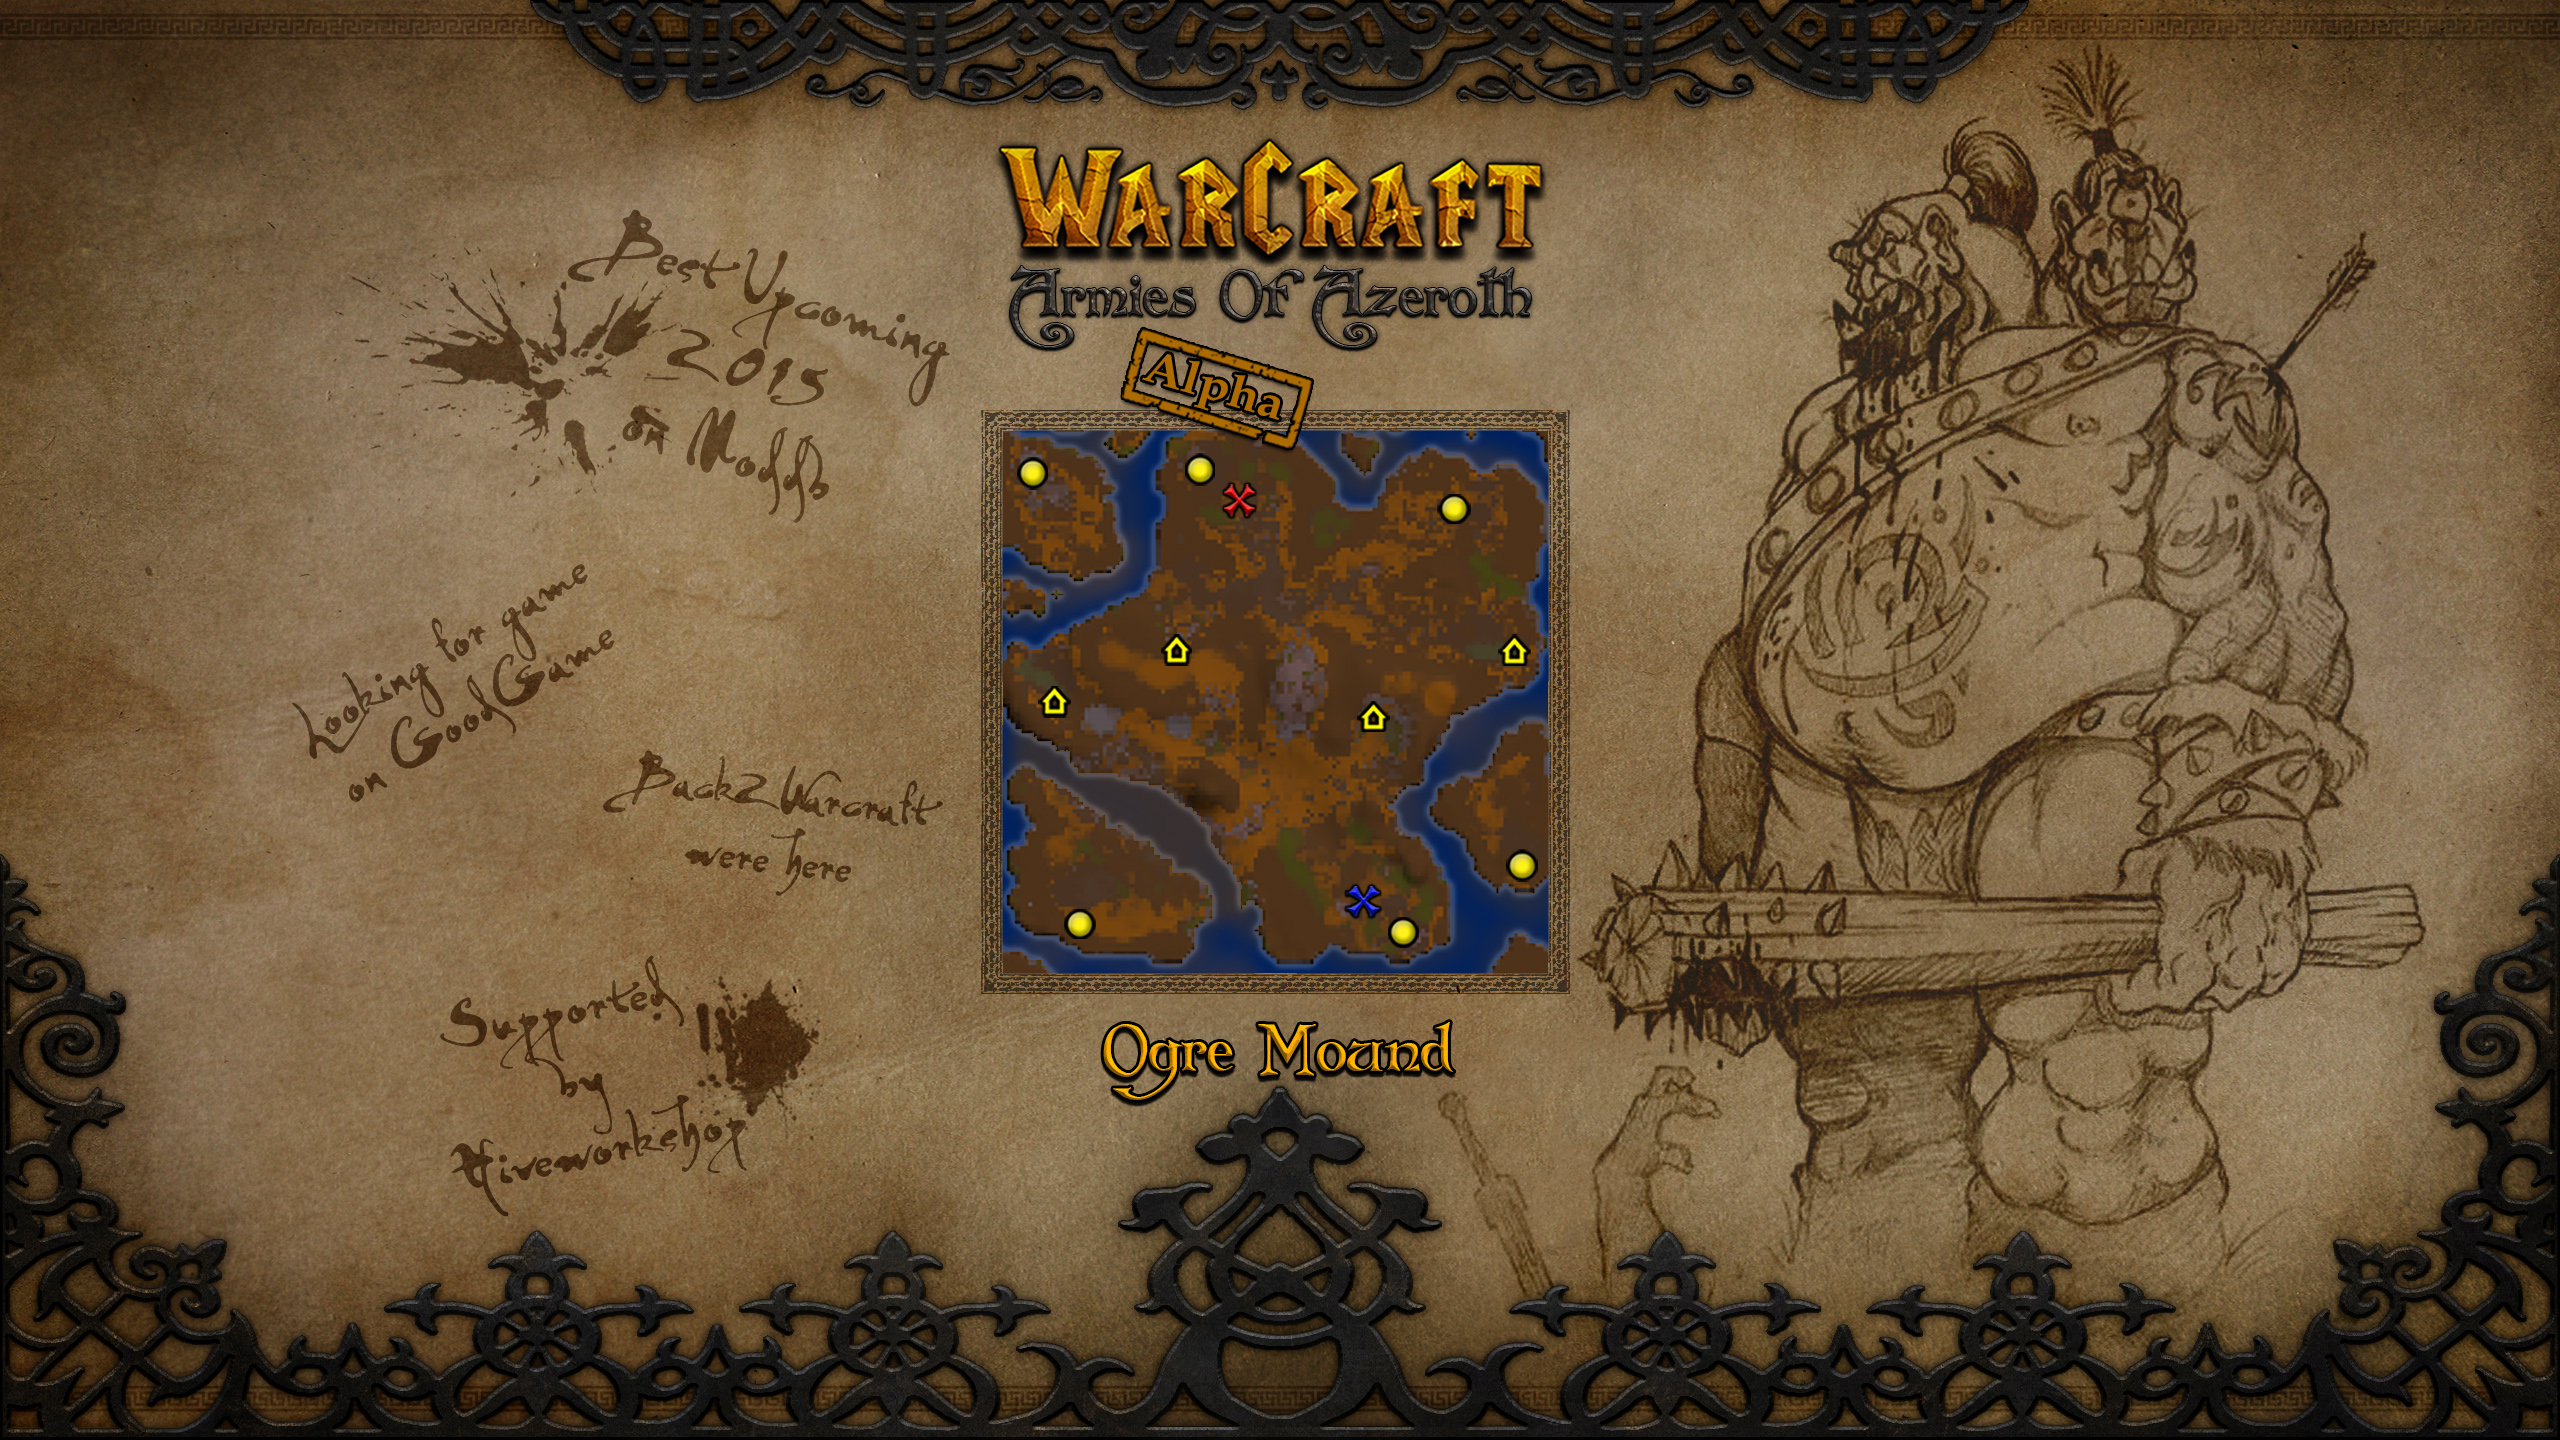 Tails of azeroth blue is better. Карта варкрафт 2. Warcraft 2 карта Азерота. Огр Warcraft 2.